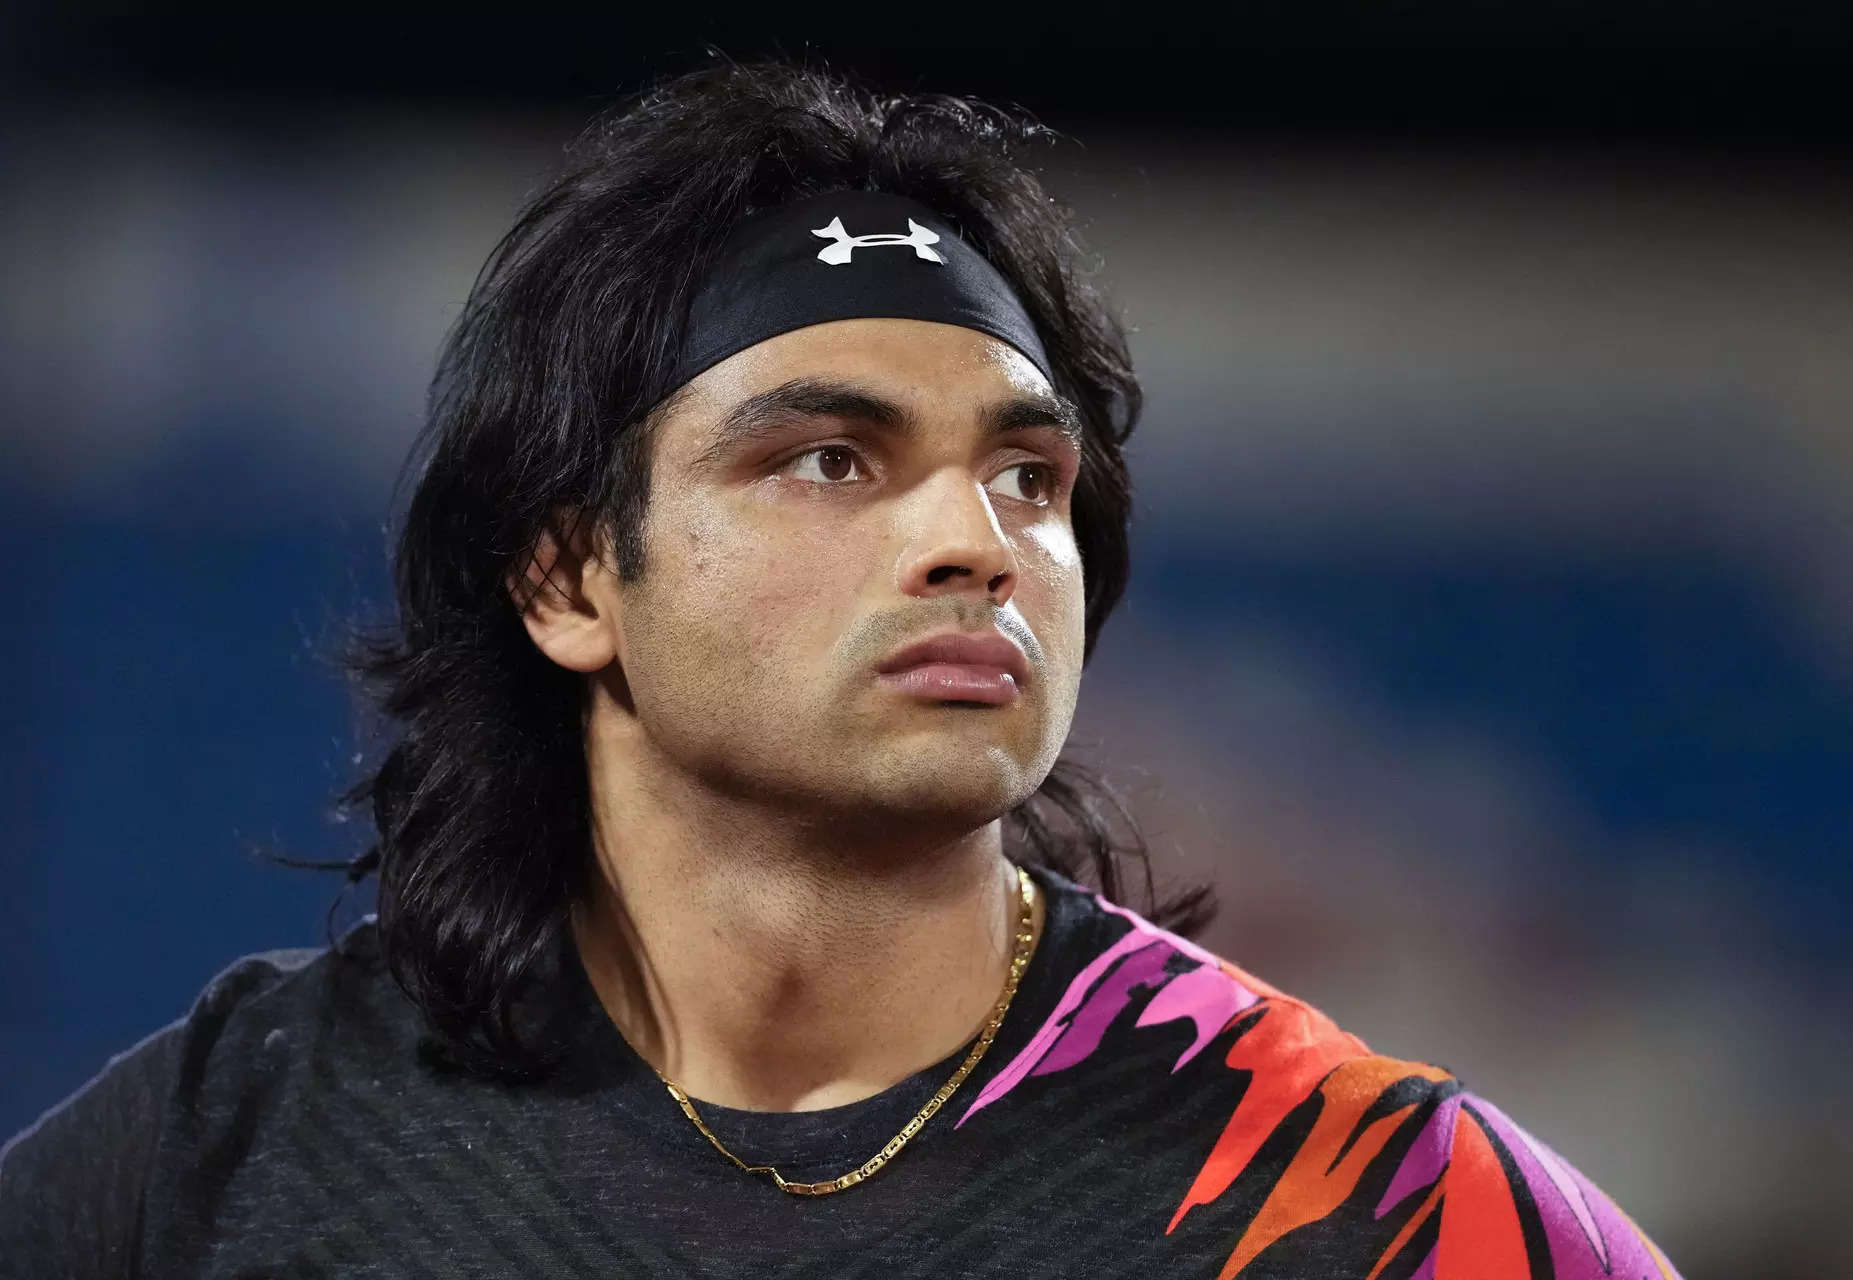 Golden boy Neeraj Chopra in action tomorrow at Paris Olympics: Here’s all you need to know ahead of the ultimate throw 